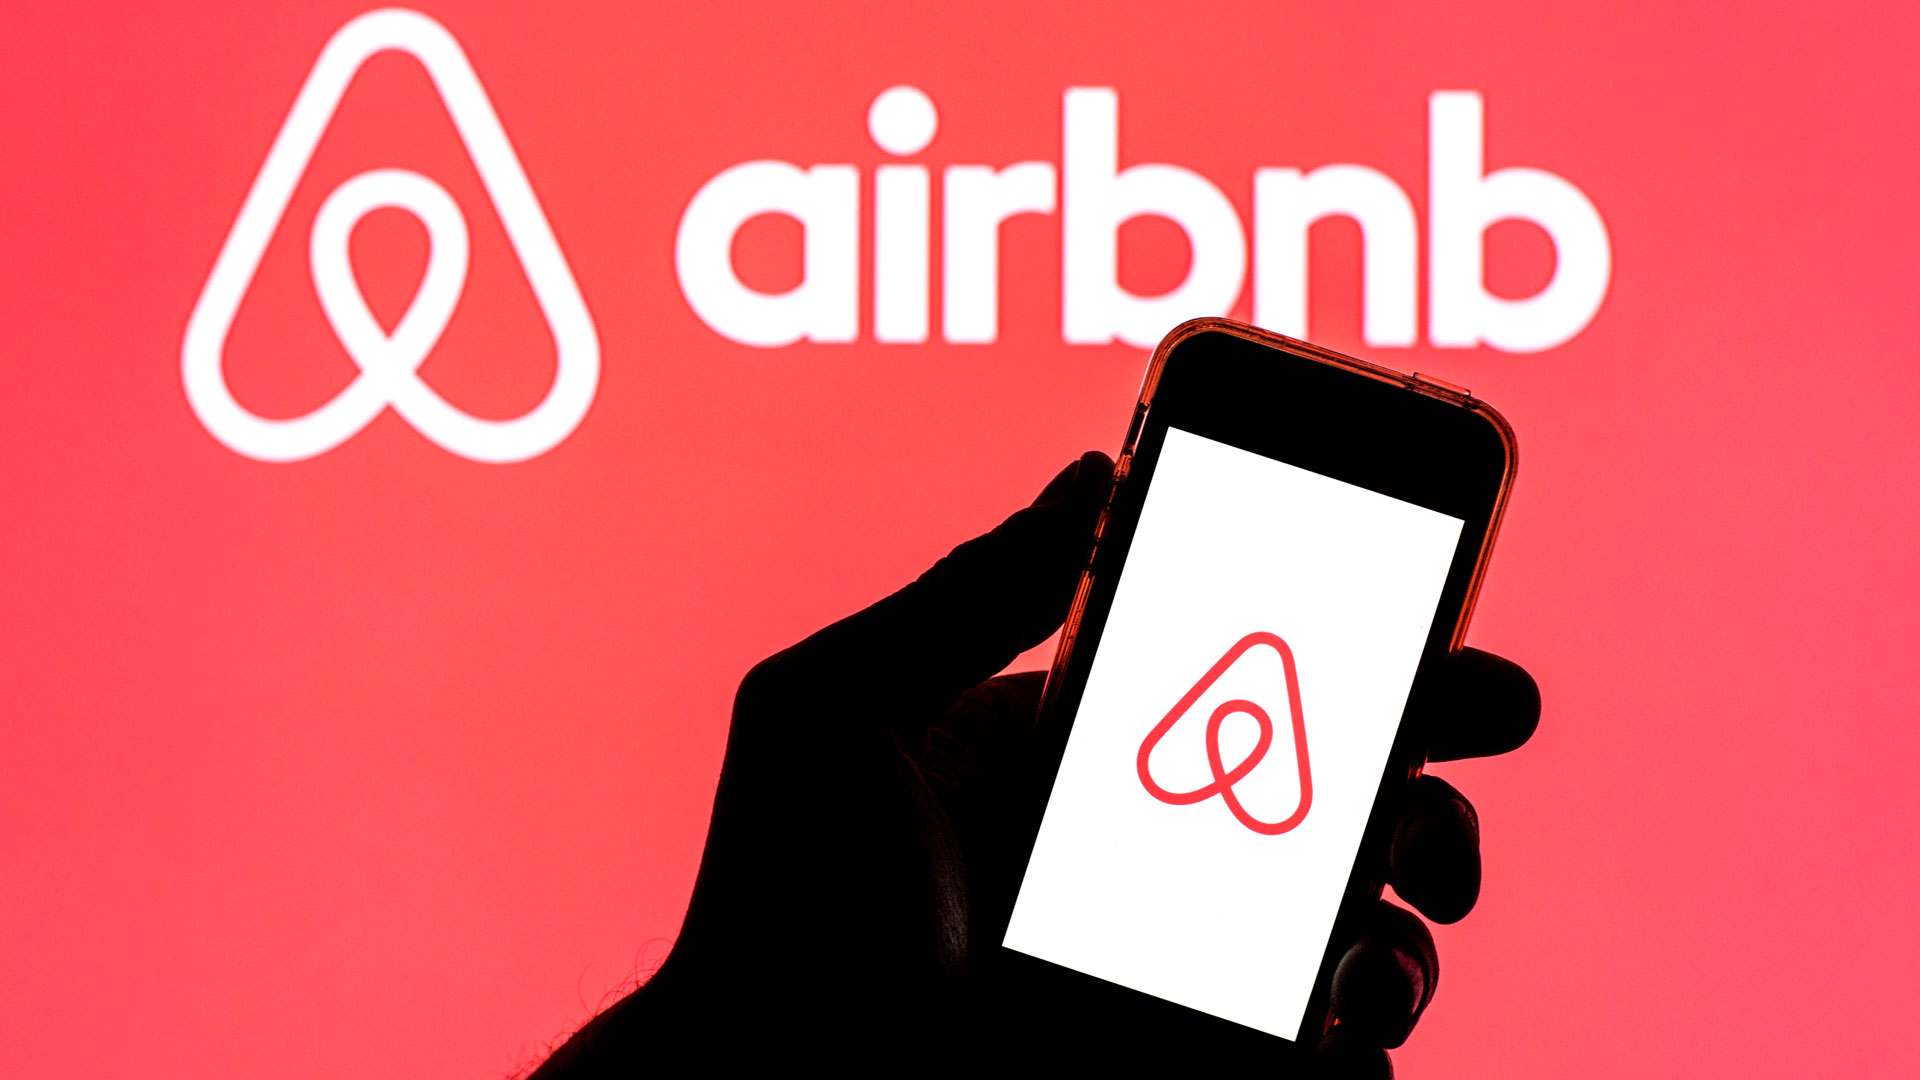 Get the Most Out of Your App Design: Learn How to Create an AirBnb Clone